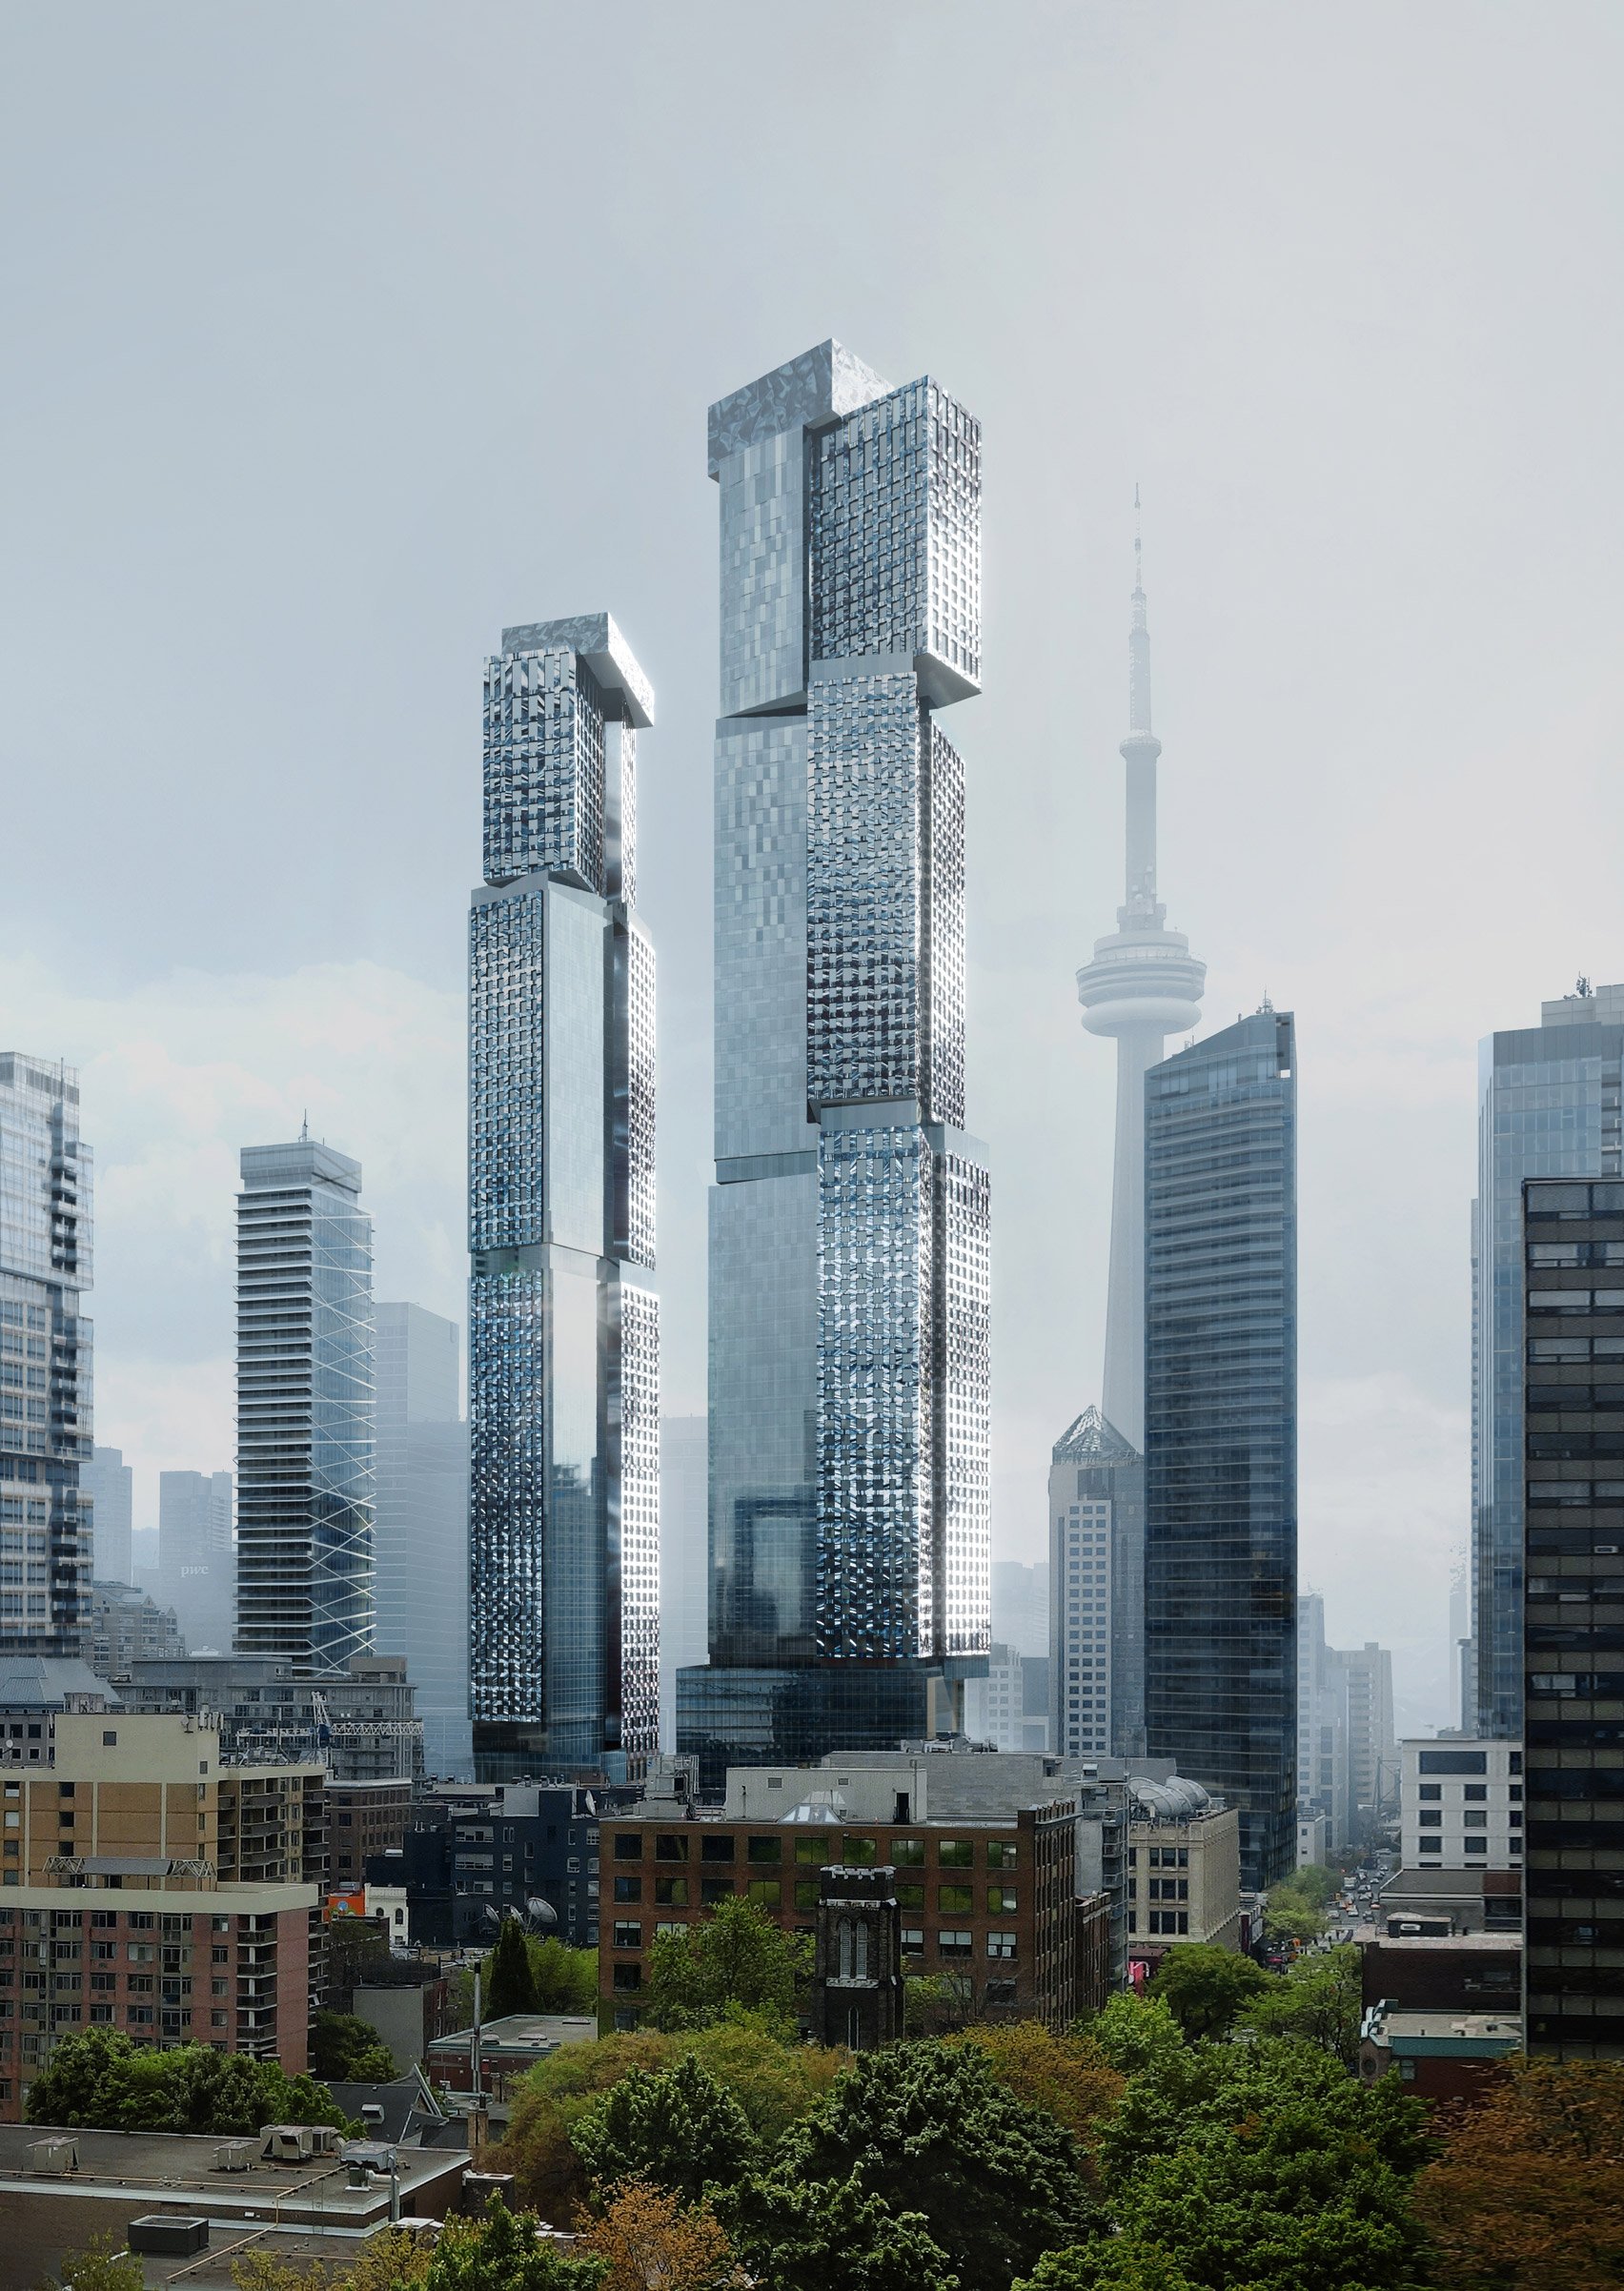 New visuals of the Gehry Project in Toronto 